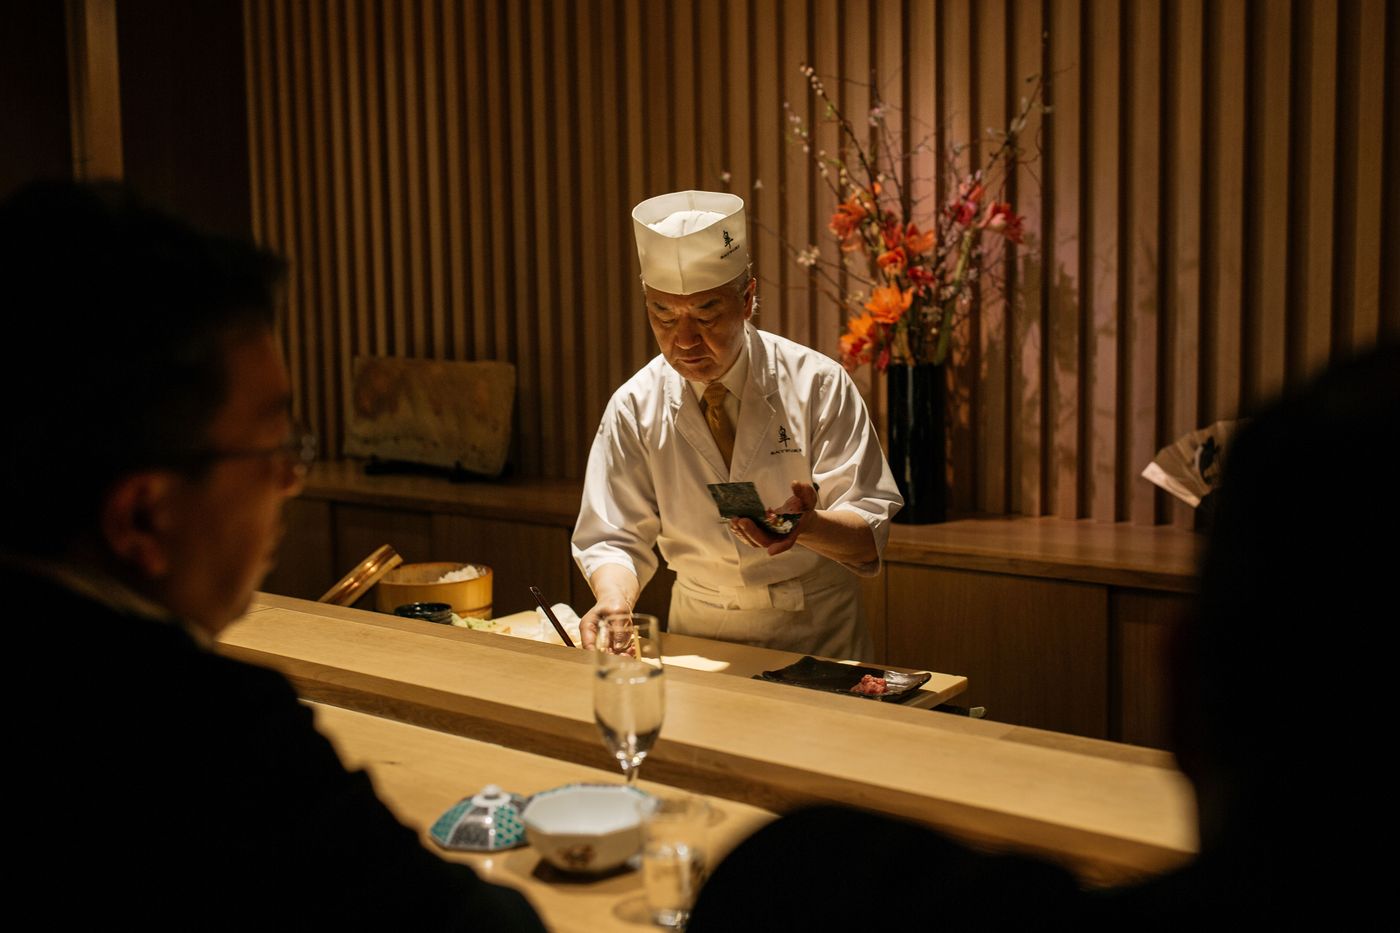 Change of Chefs at Sushi Yasuda in Midtown Manhattan - The New